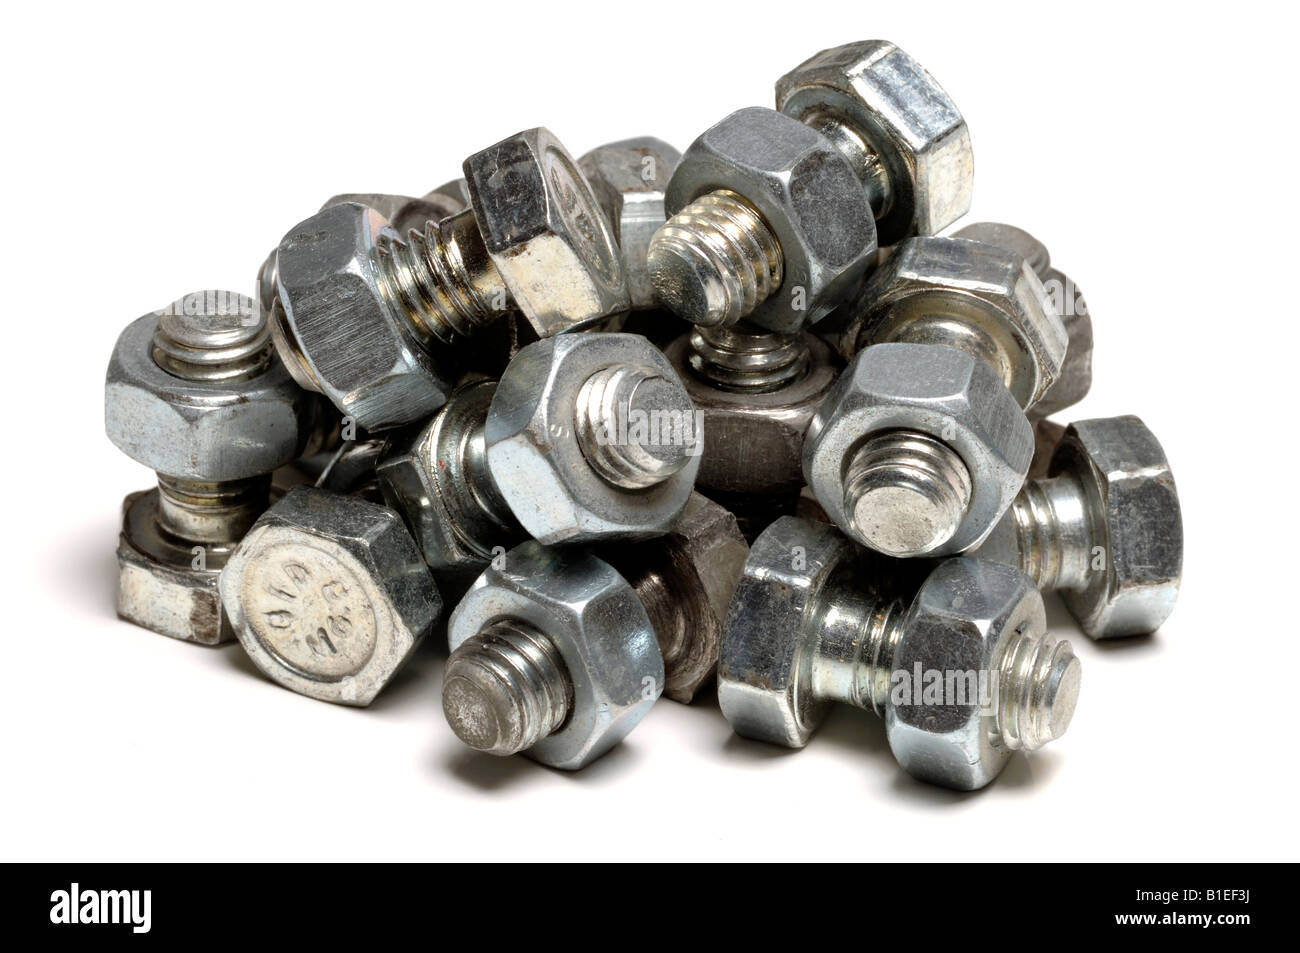 Pile of metal nuts and bolts Stock Photo